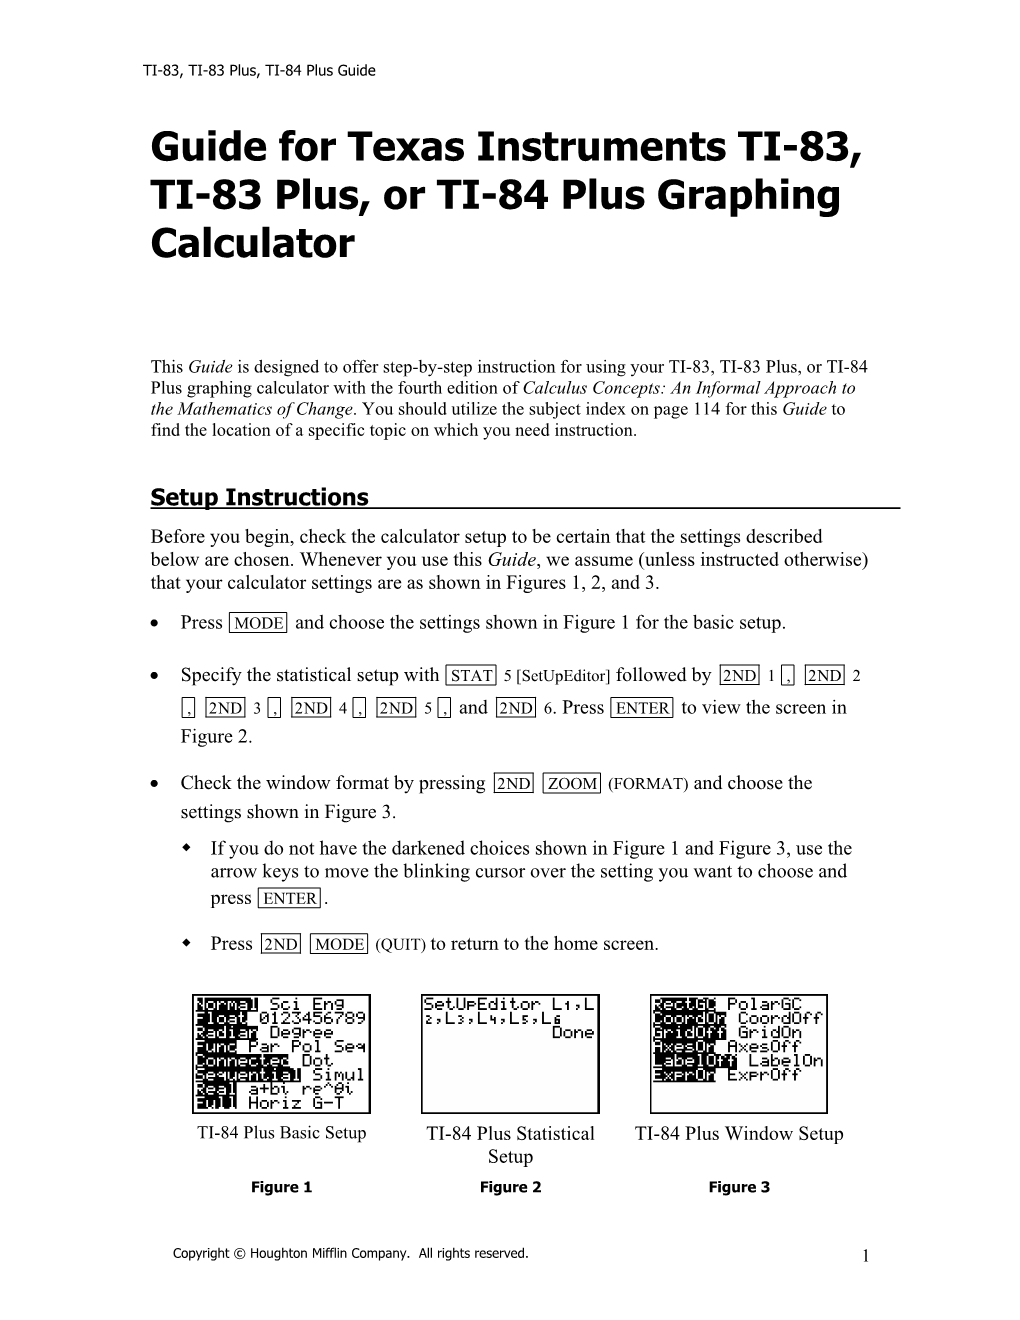 Guide for Texas Instruments TI-83, TI-83 Plus, Or TI-84 Plus Graphing Calculator